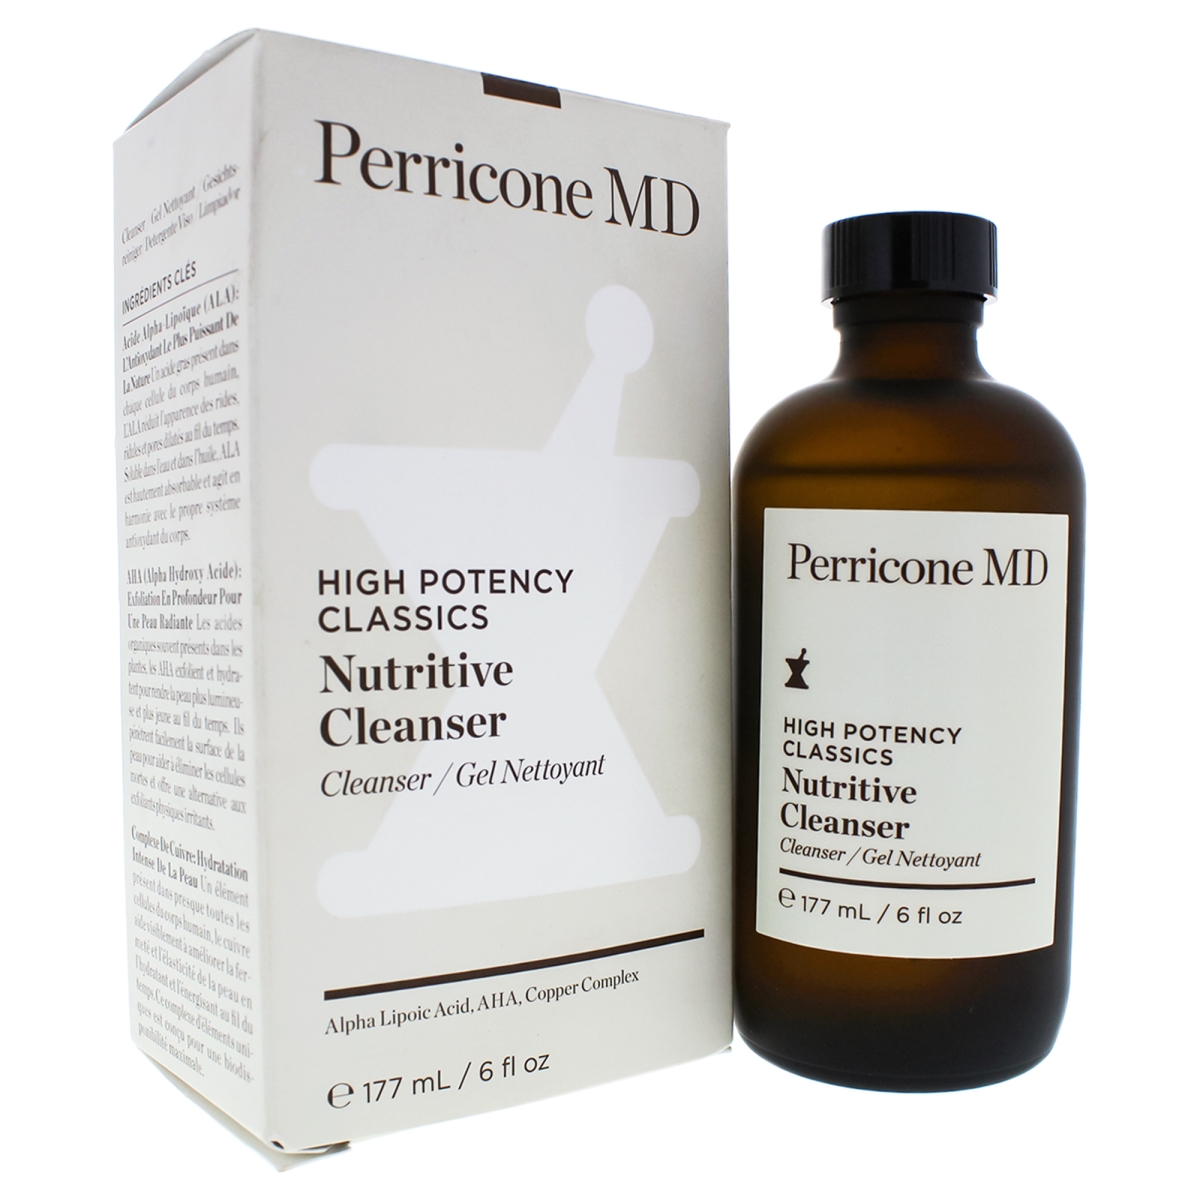 I0087930 High Potency Classics Nutritive Cleanser For Unisex - 6 Oz